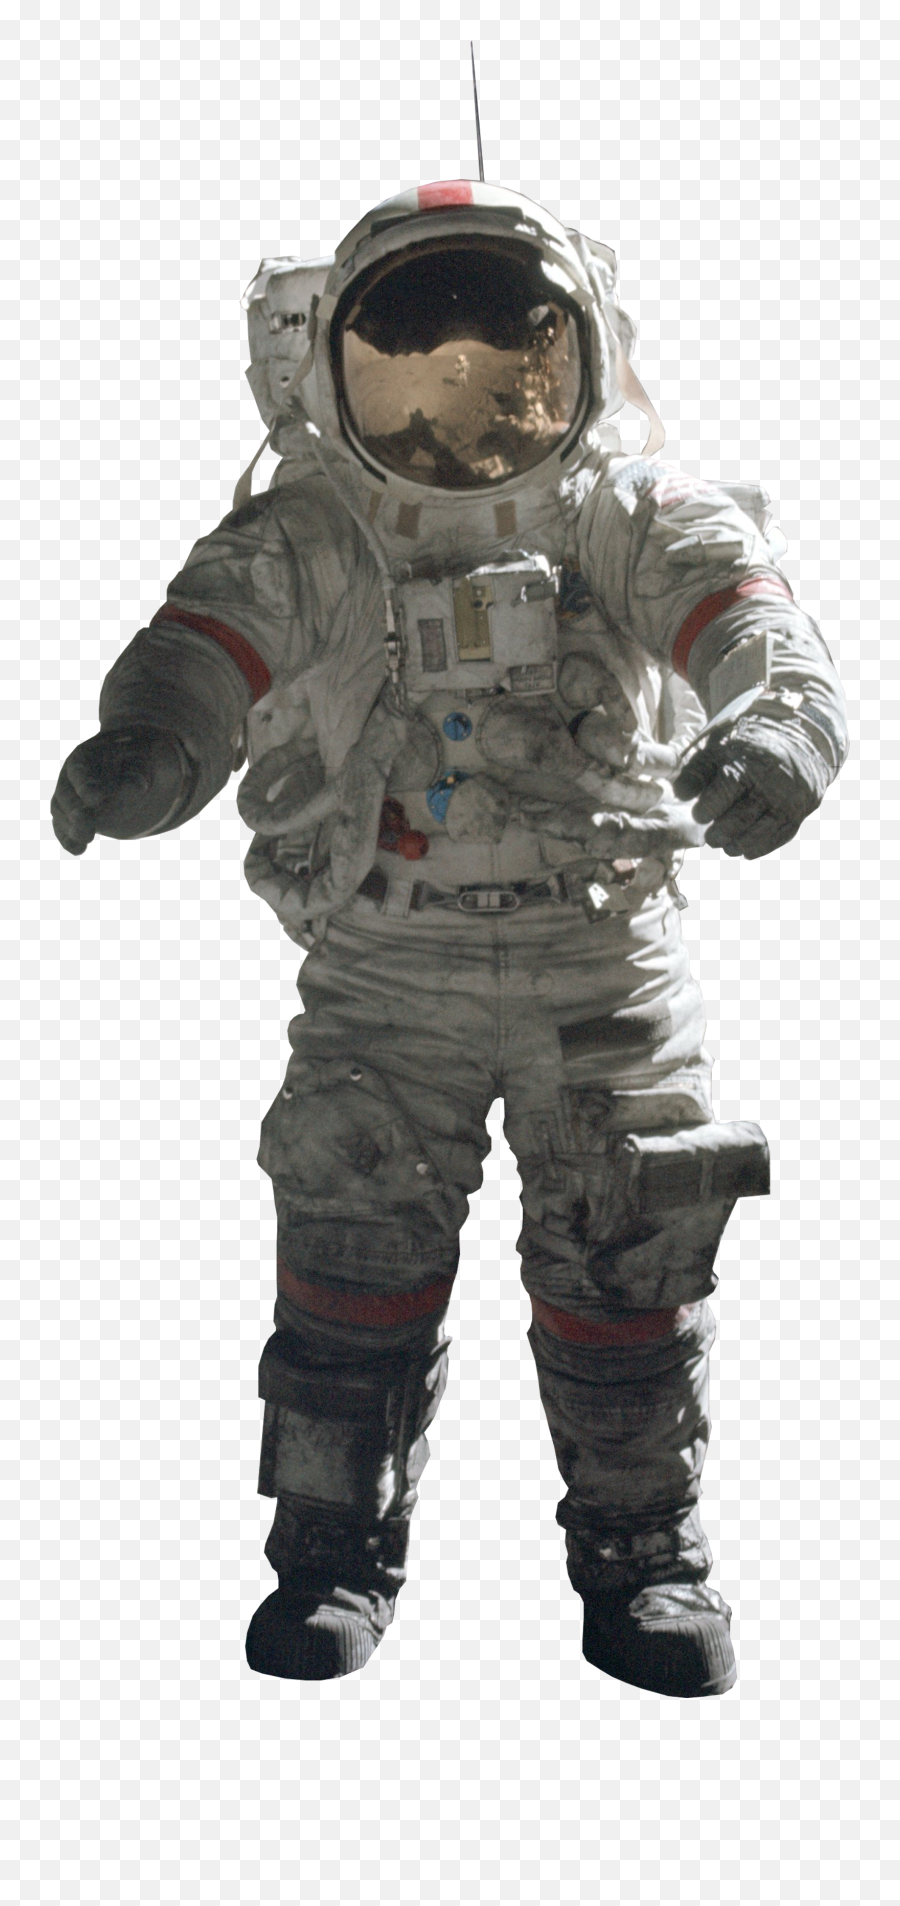 Astronaut In Protective Suit Isolated Free Image Download Png Space Helmet Icon